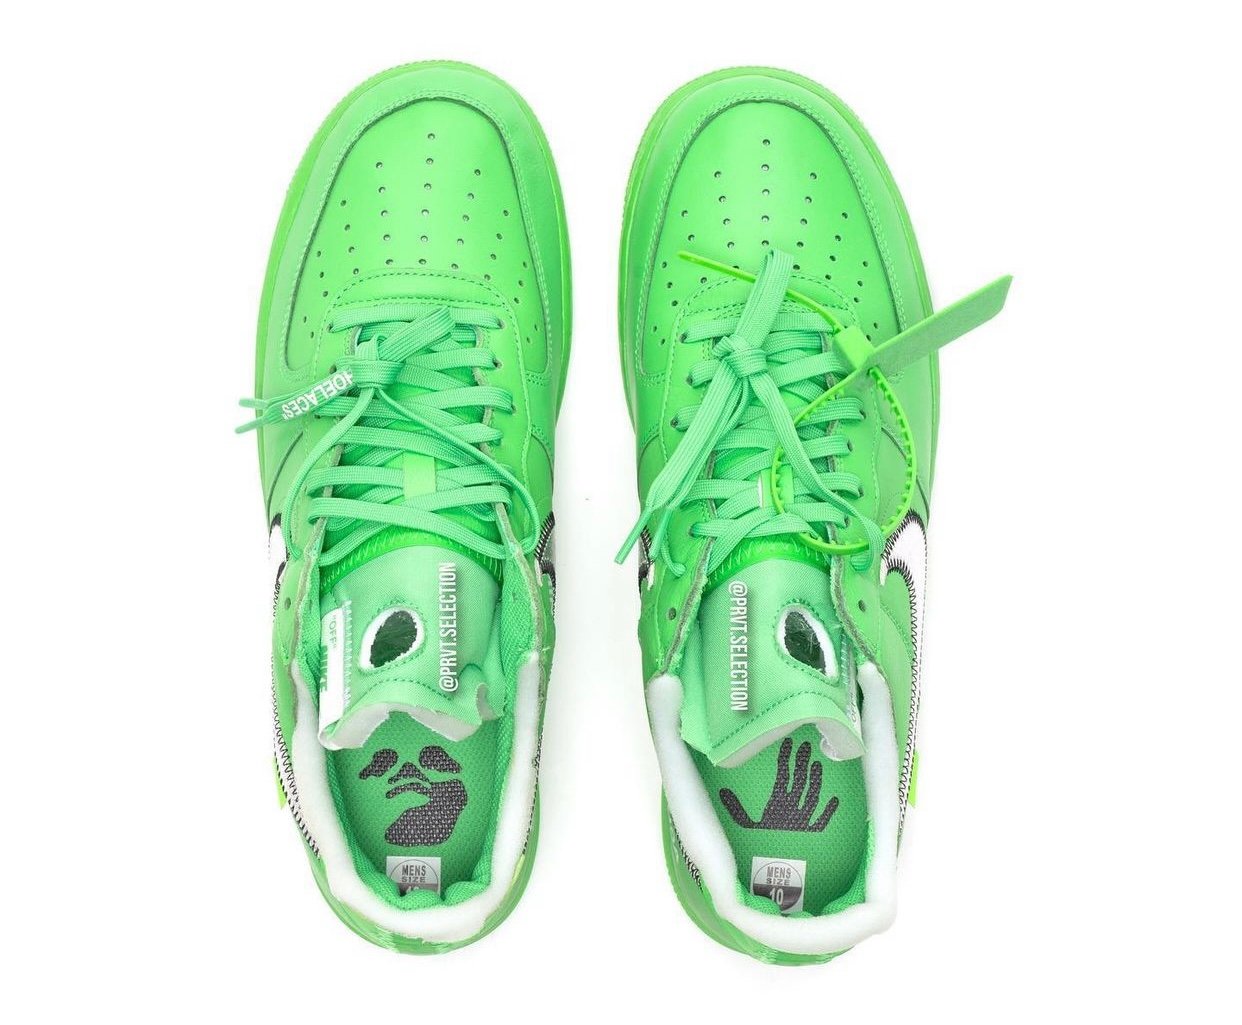 Off-White Nike Air Force 1 Low Green DX1419-300 Release Date Info